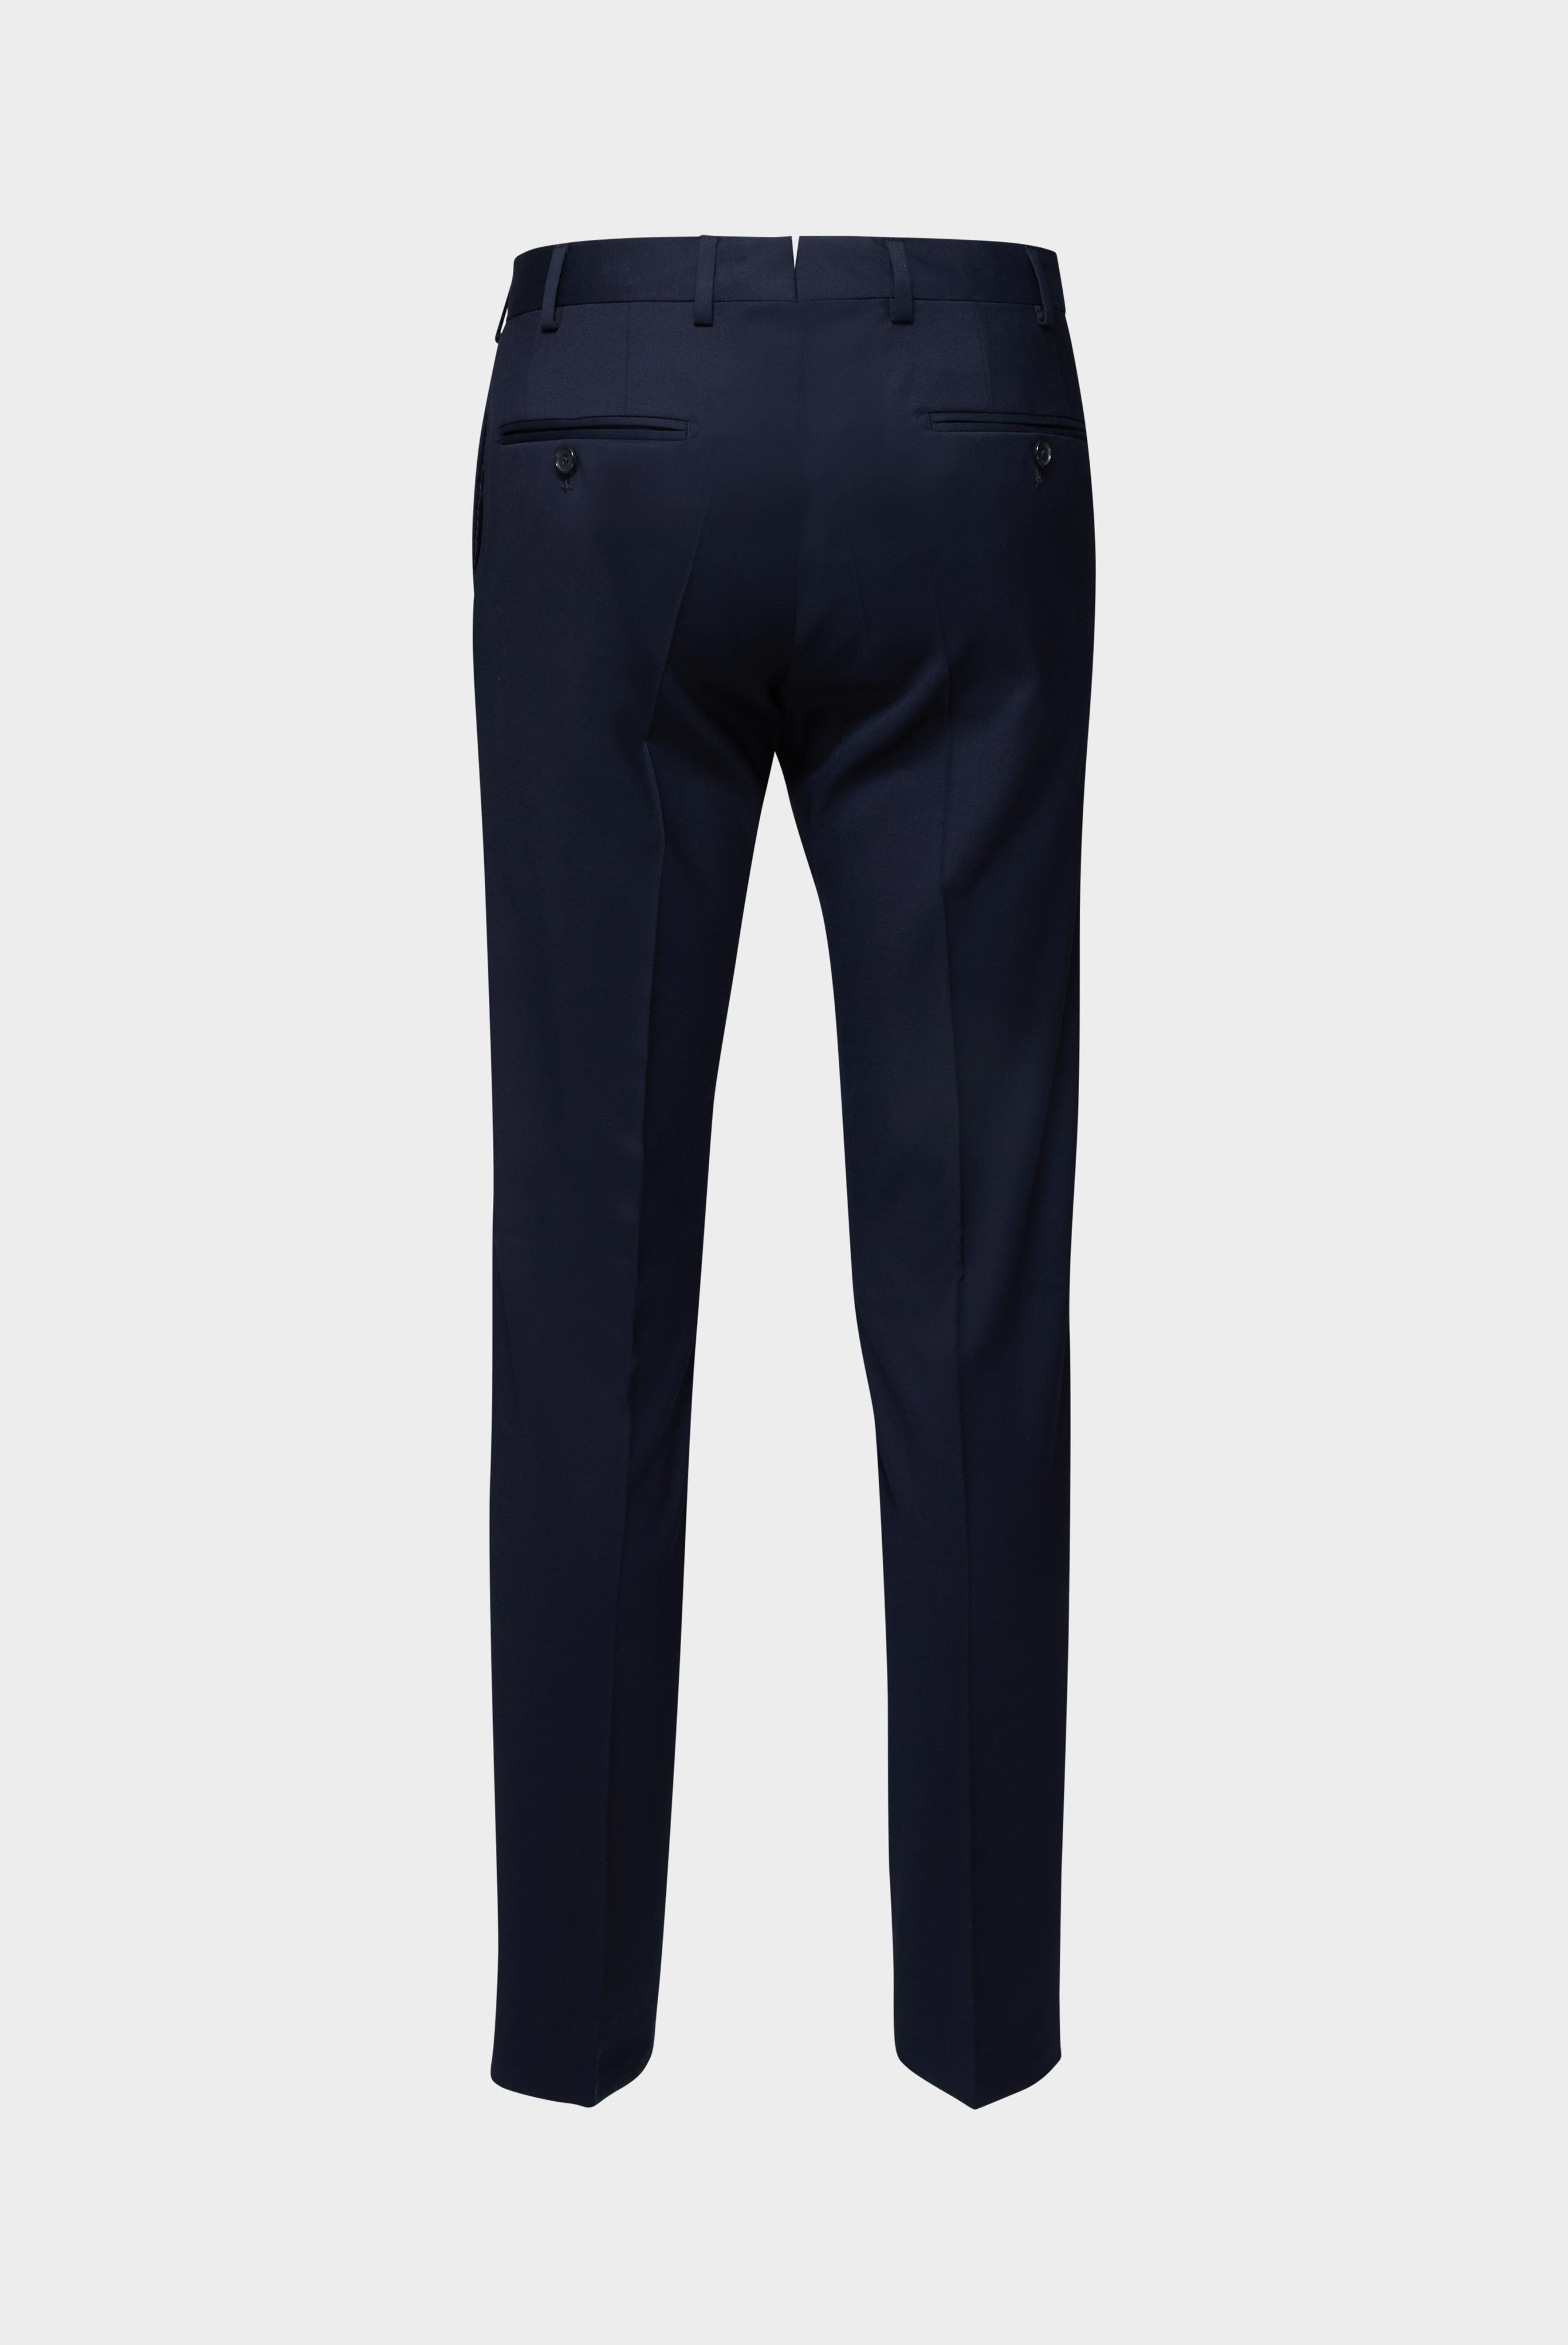 Jeans & Trousers+Wool Trousers Slim Fit+20.7880.16.H01010.780.50